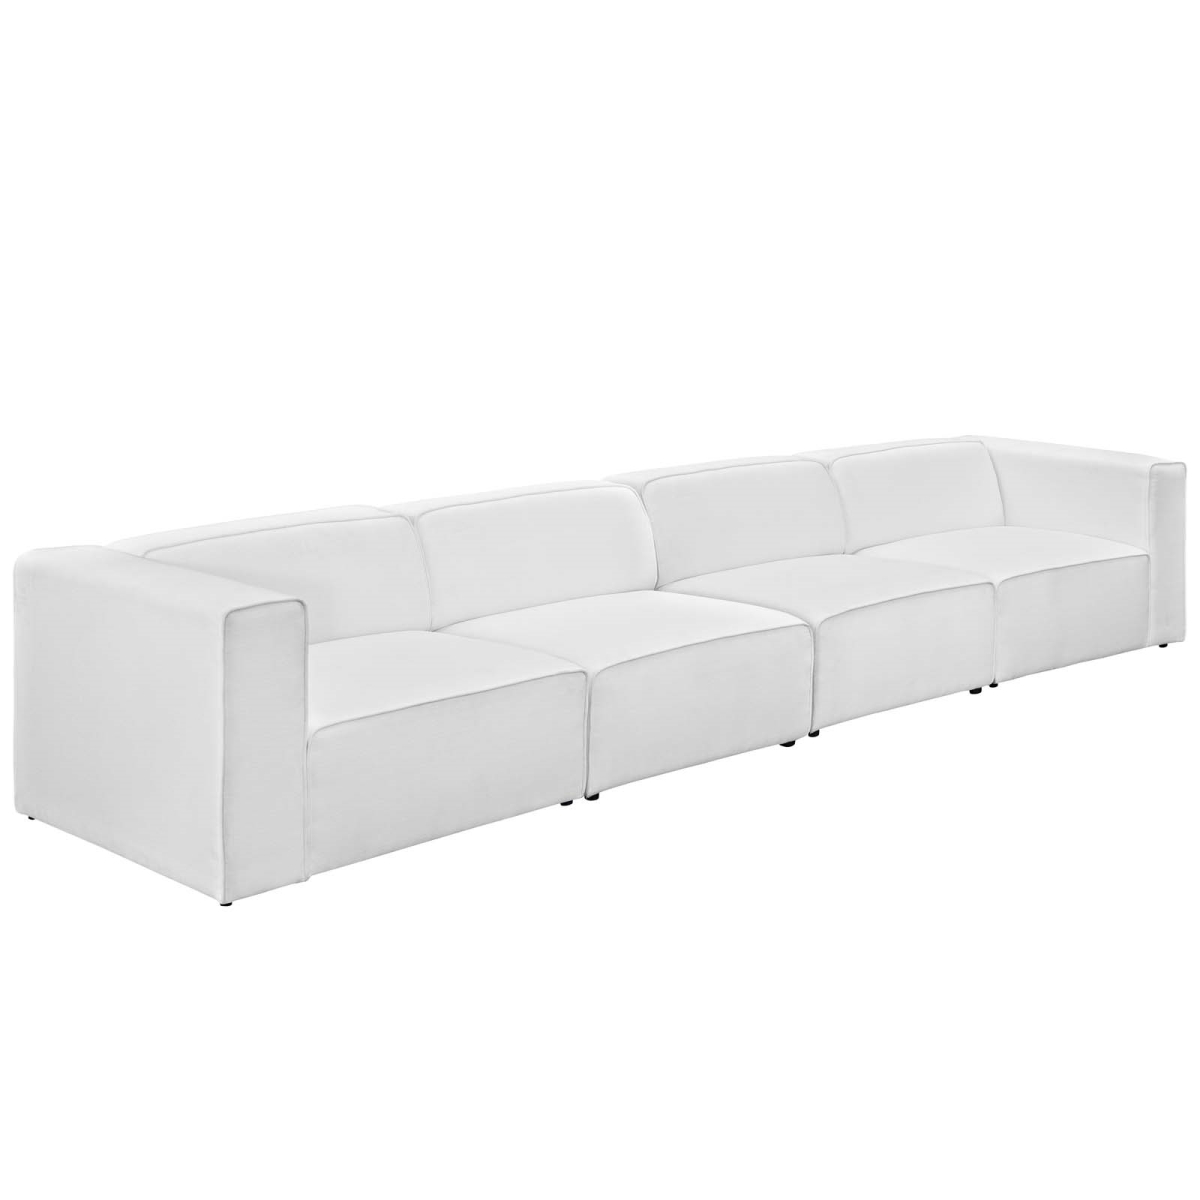 Eei-2829-whi 4 Piece Mingle Upholstered Fabric Sectional Sofa Set - White, 27 X 156 X 37 In.